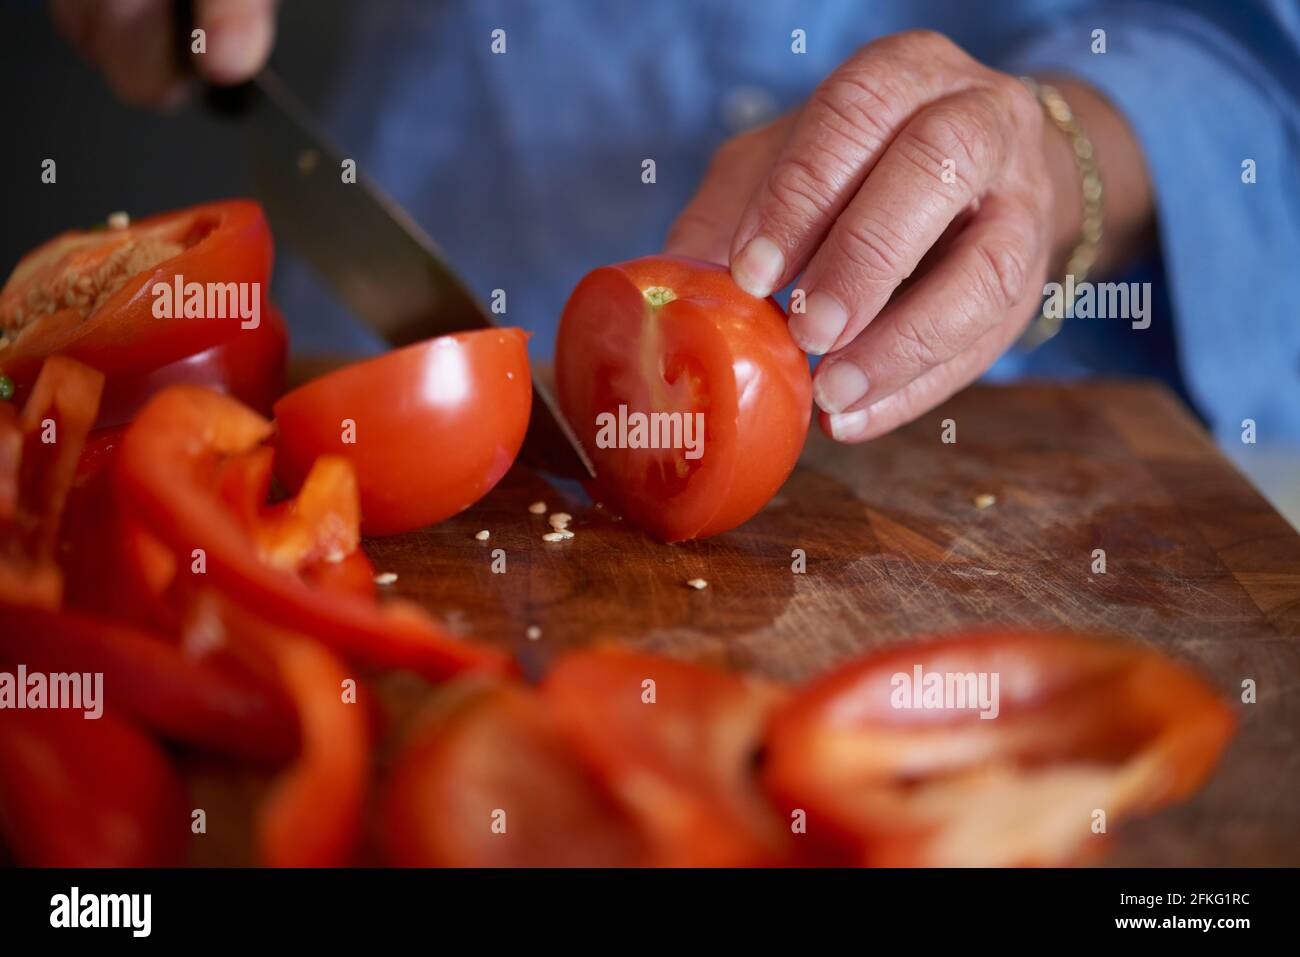 Senior older woman chopping vegetables in modern kitchen. Closeup of tomatoes. Stock Photo